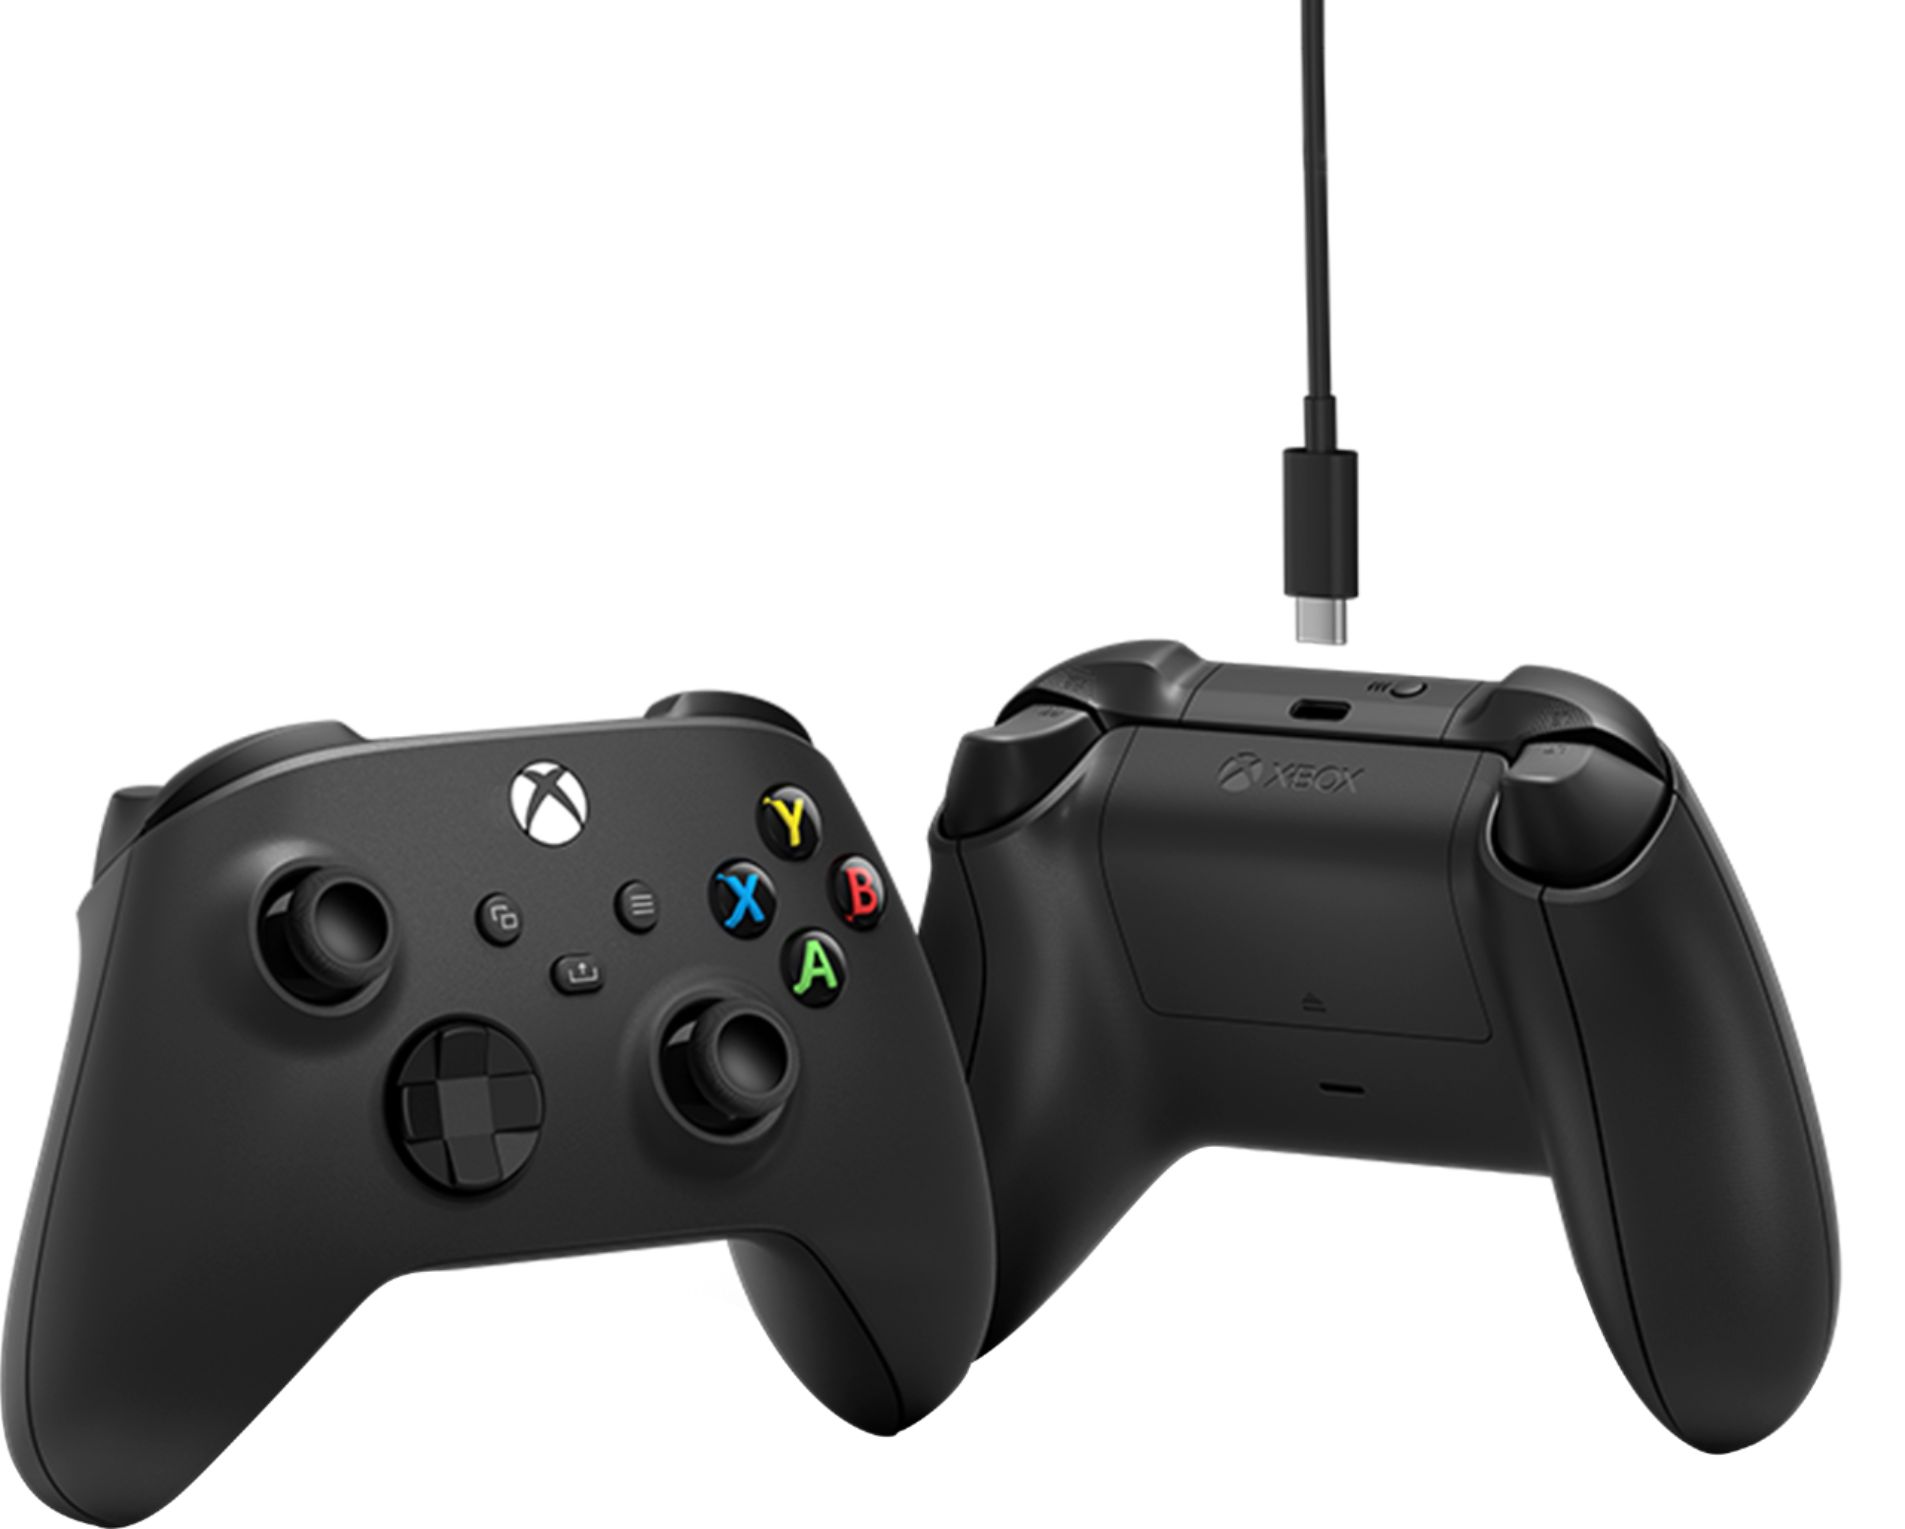 Microsoft Controller For Xbox Series X S And Xbox One Usb C Cable Latest Model Black 1v8 Best Buy